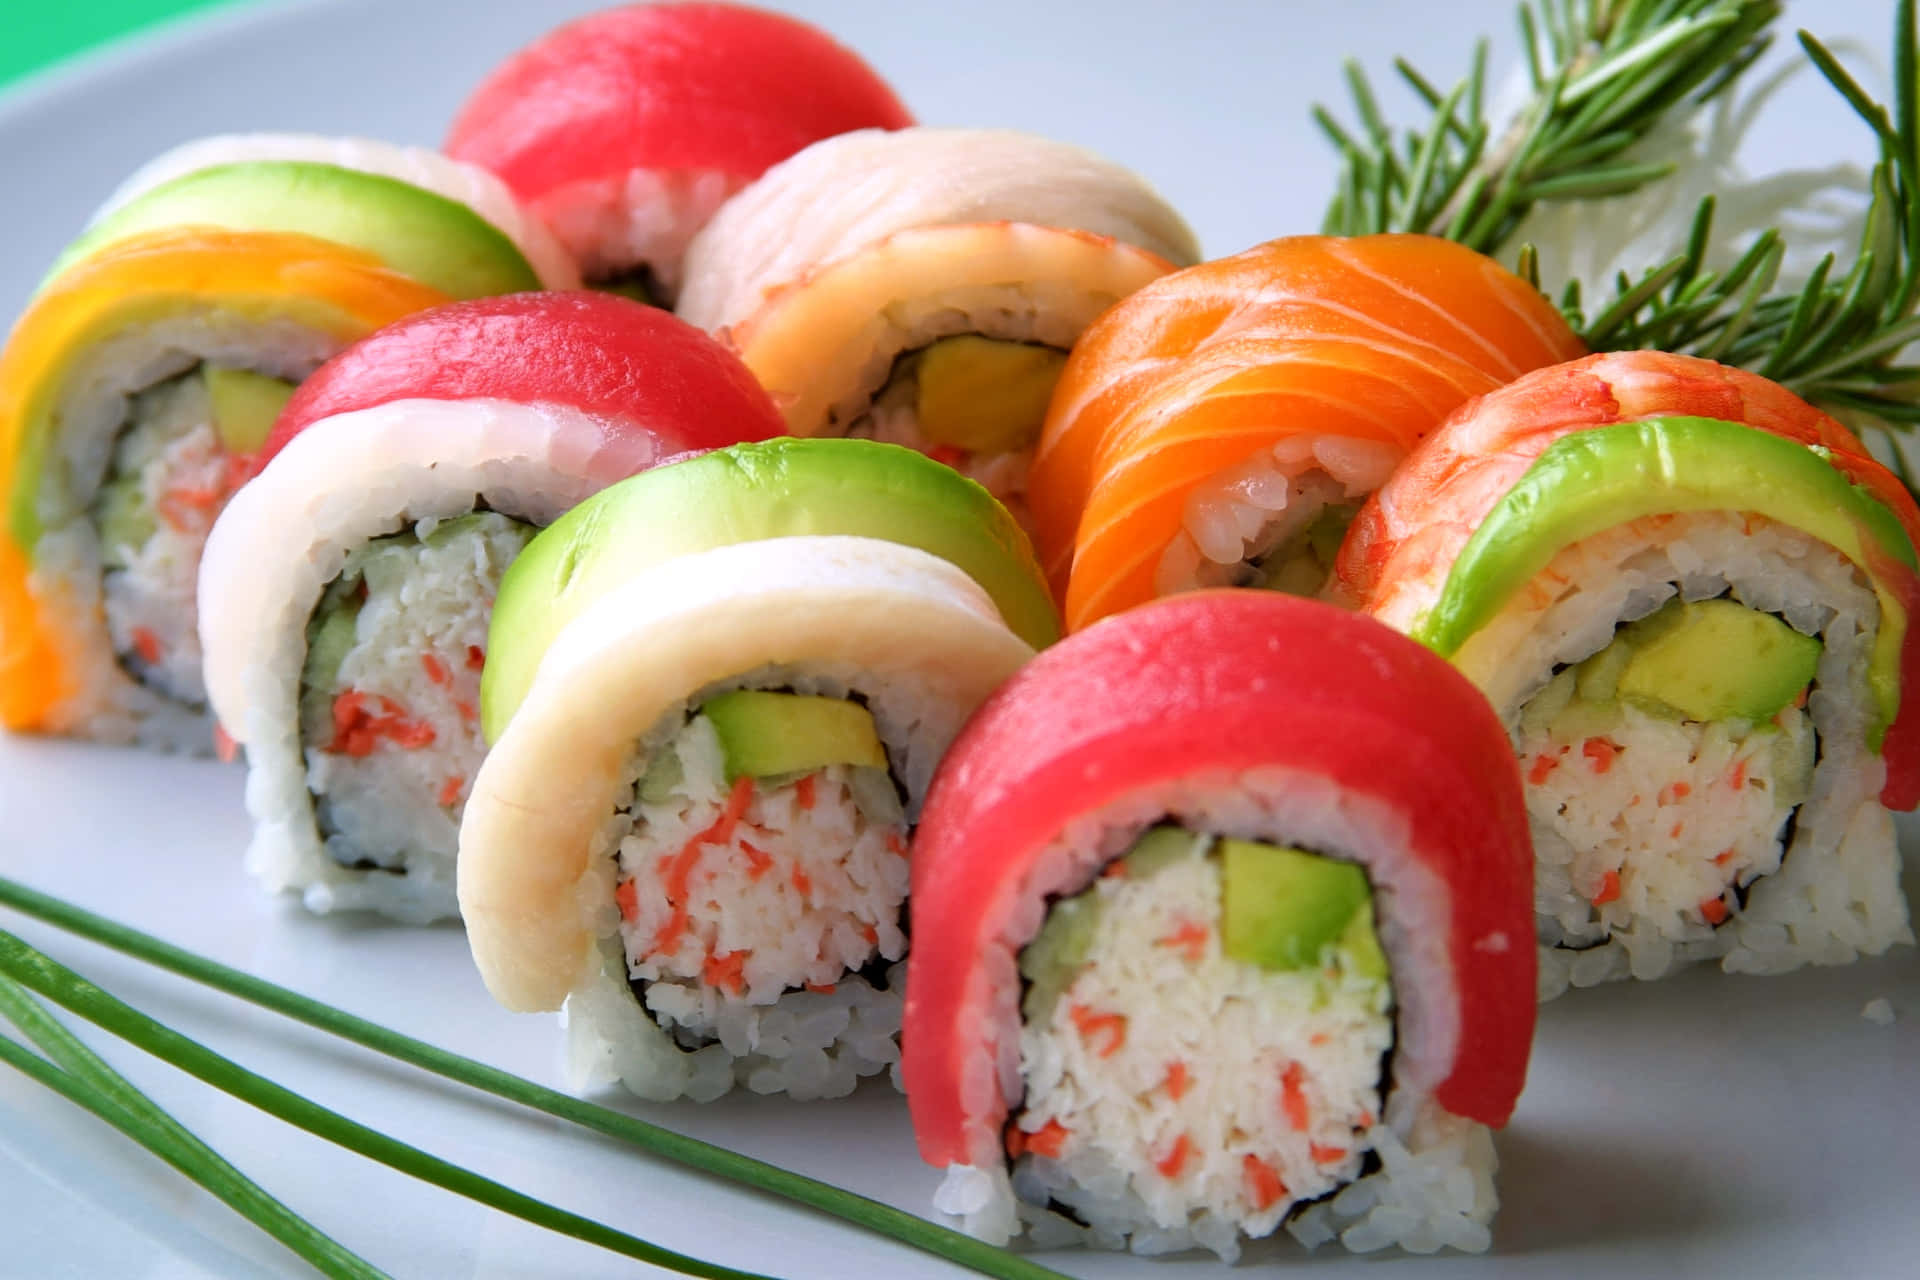 Enjoy a delicious plate of sushi with the perfect combination of freshly cut fish, vegetables, and shoyu